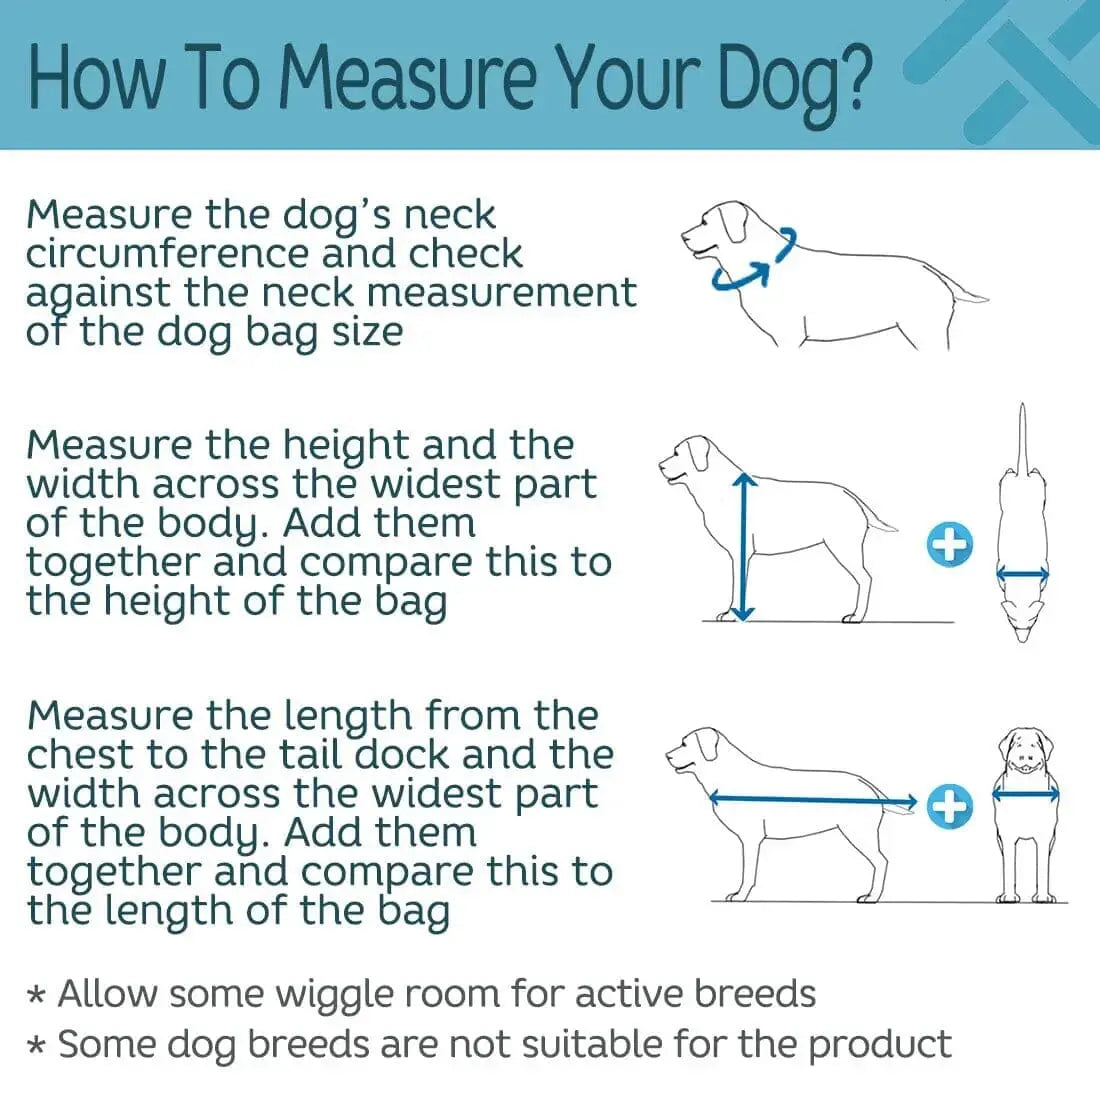 How to measure your dog infographic